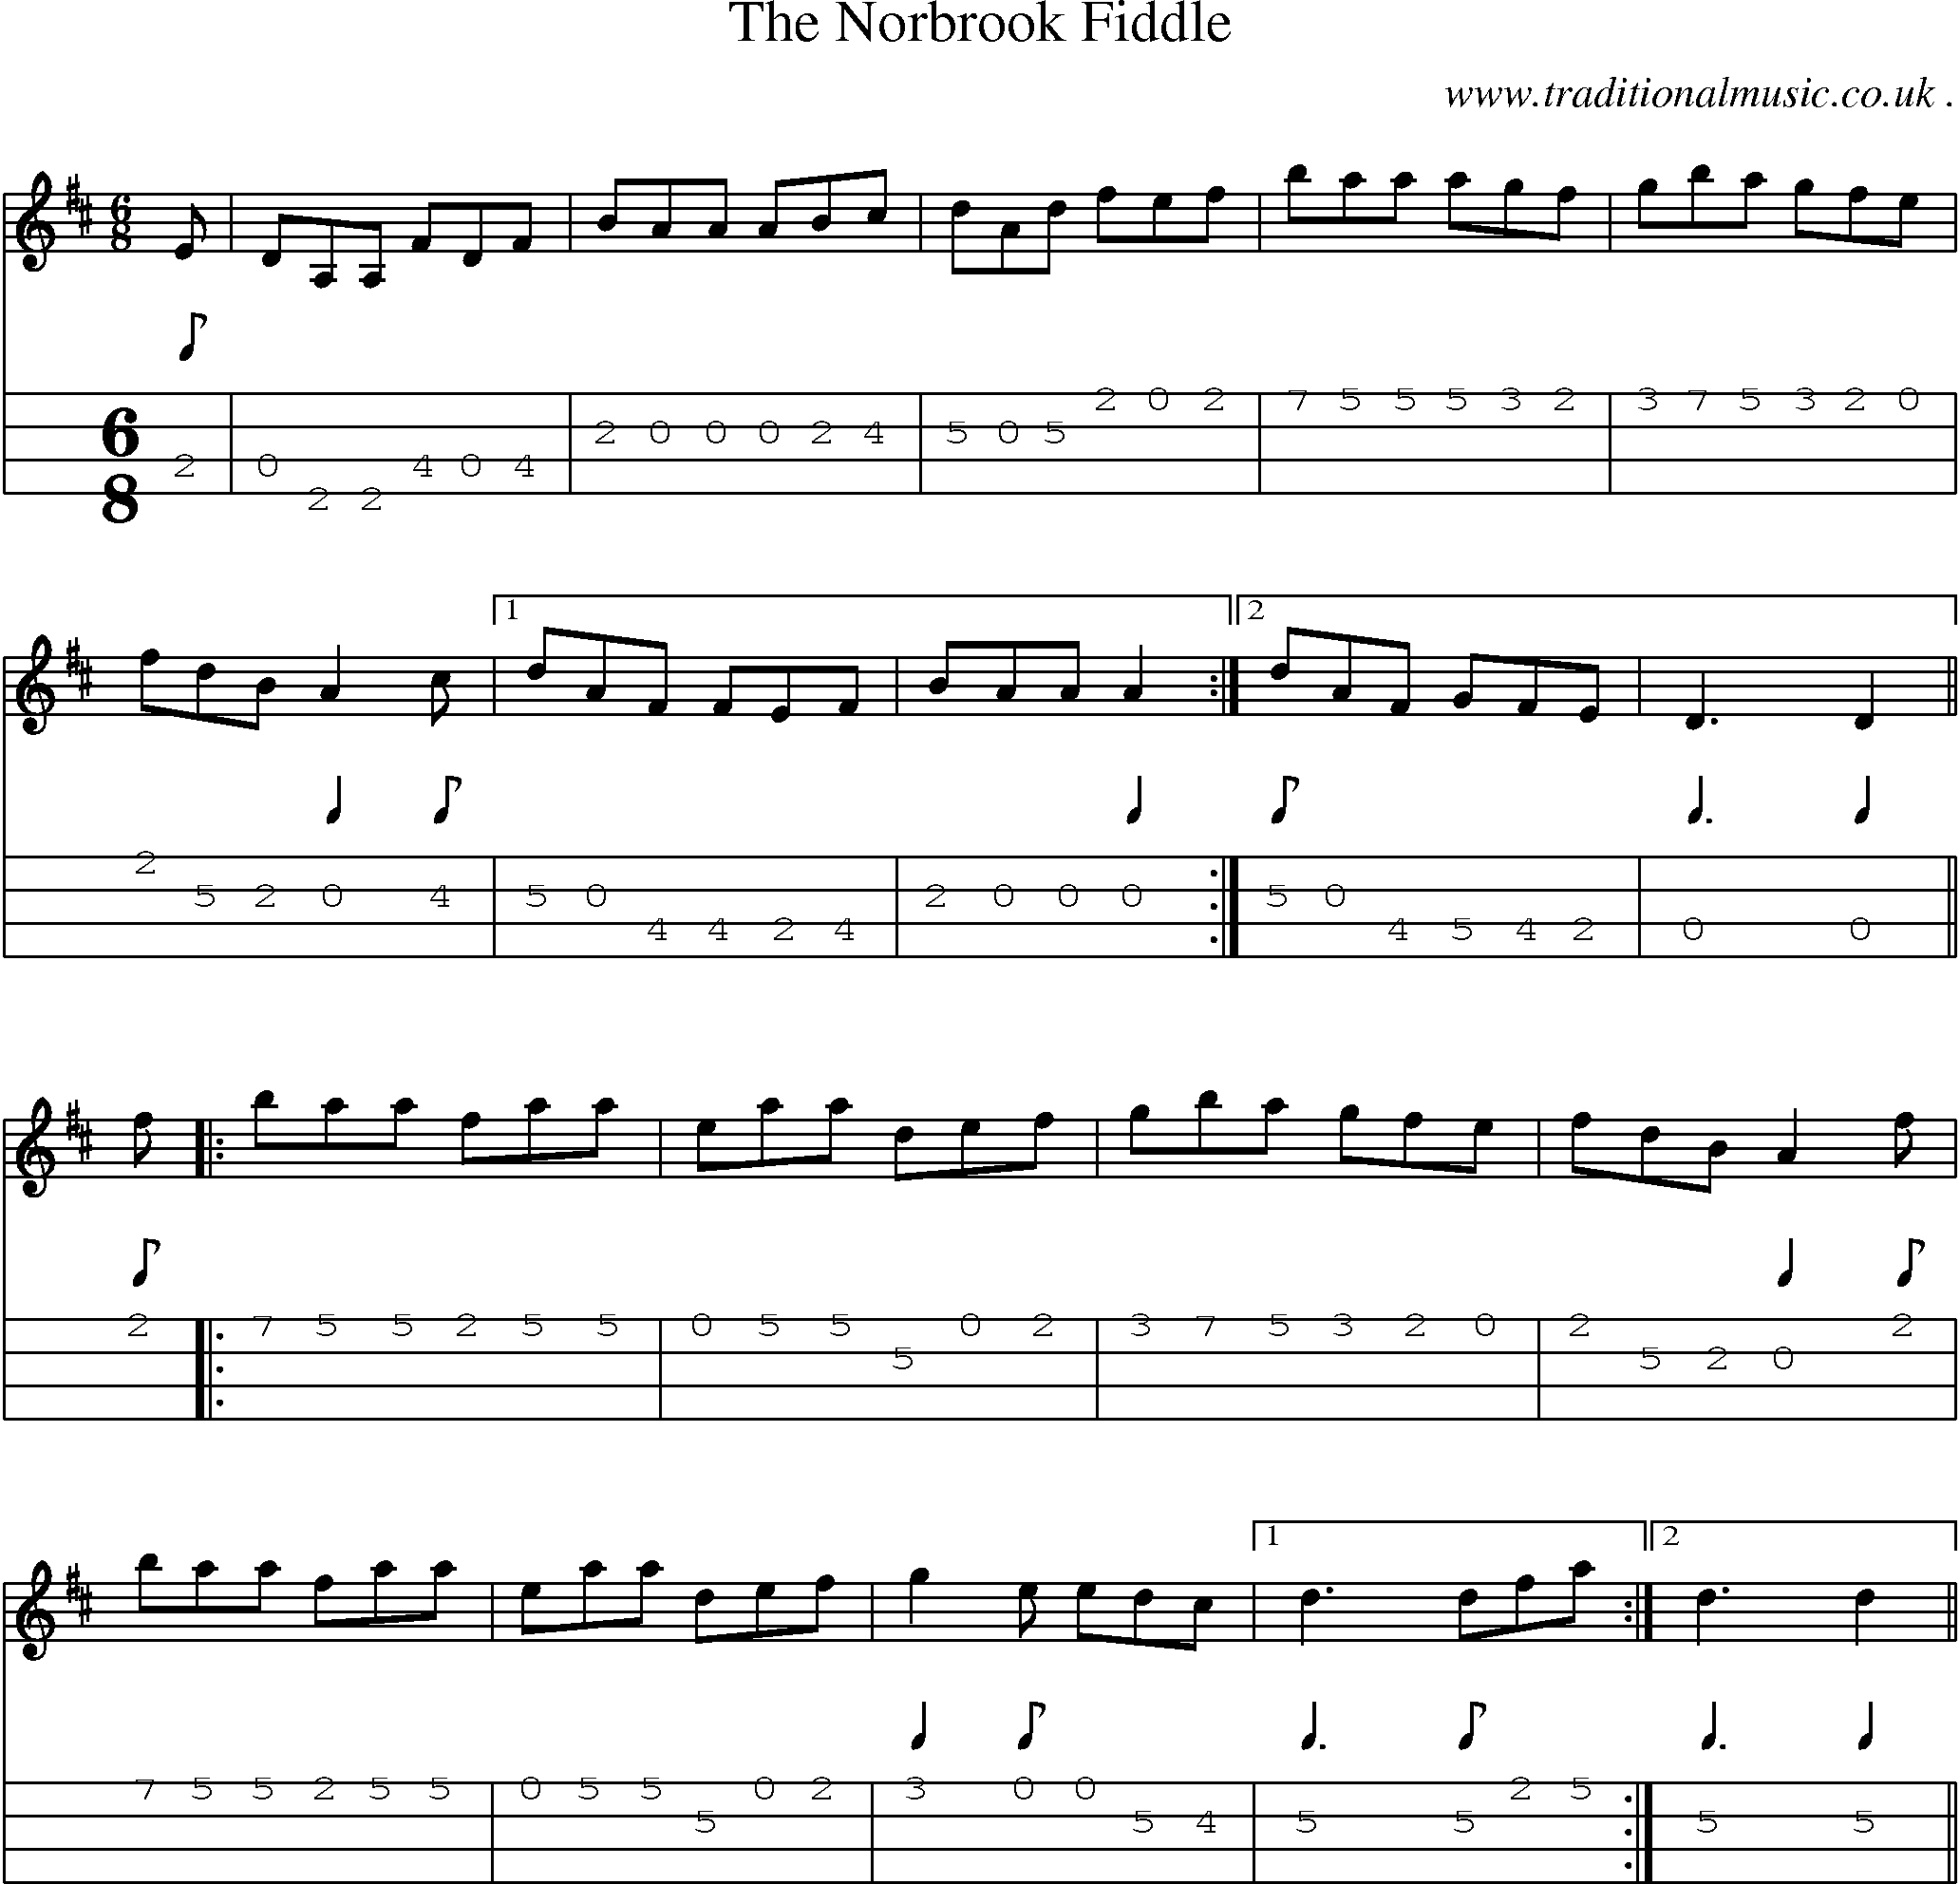 Sheet-Music and Mandolin Tabs for The Norbrook Fiddle